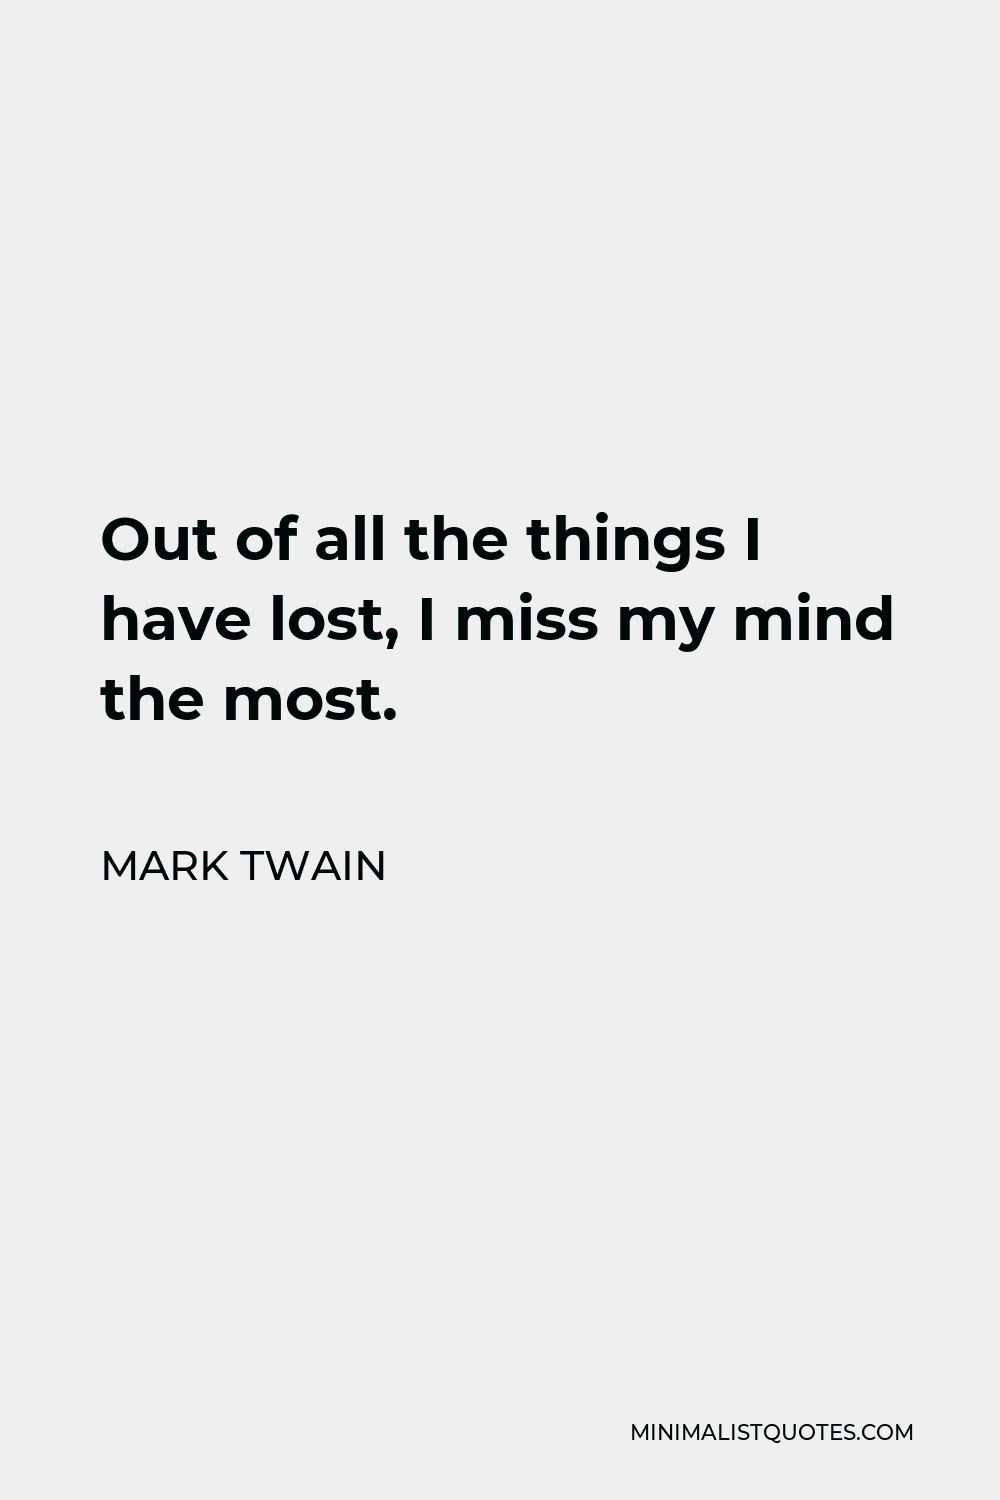 Out Of All The Things I Have Lost, I Miss My Mind The Most - Famous  American Writer Mark Twain Quote Printed On Grunge Vintage Cardboard Stock  Photo, Picture and Royalty Free